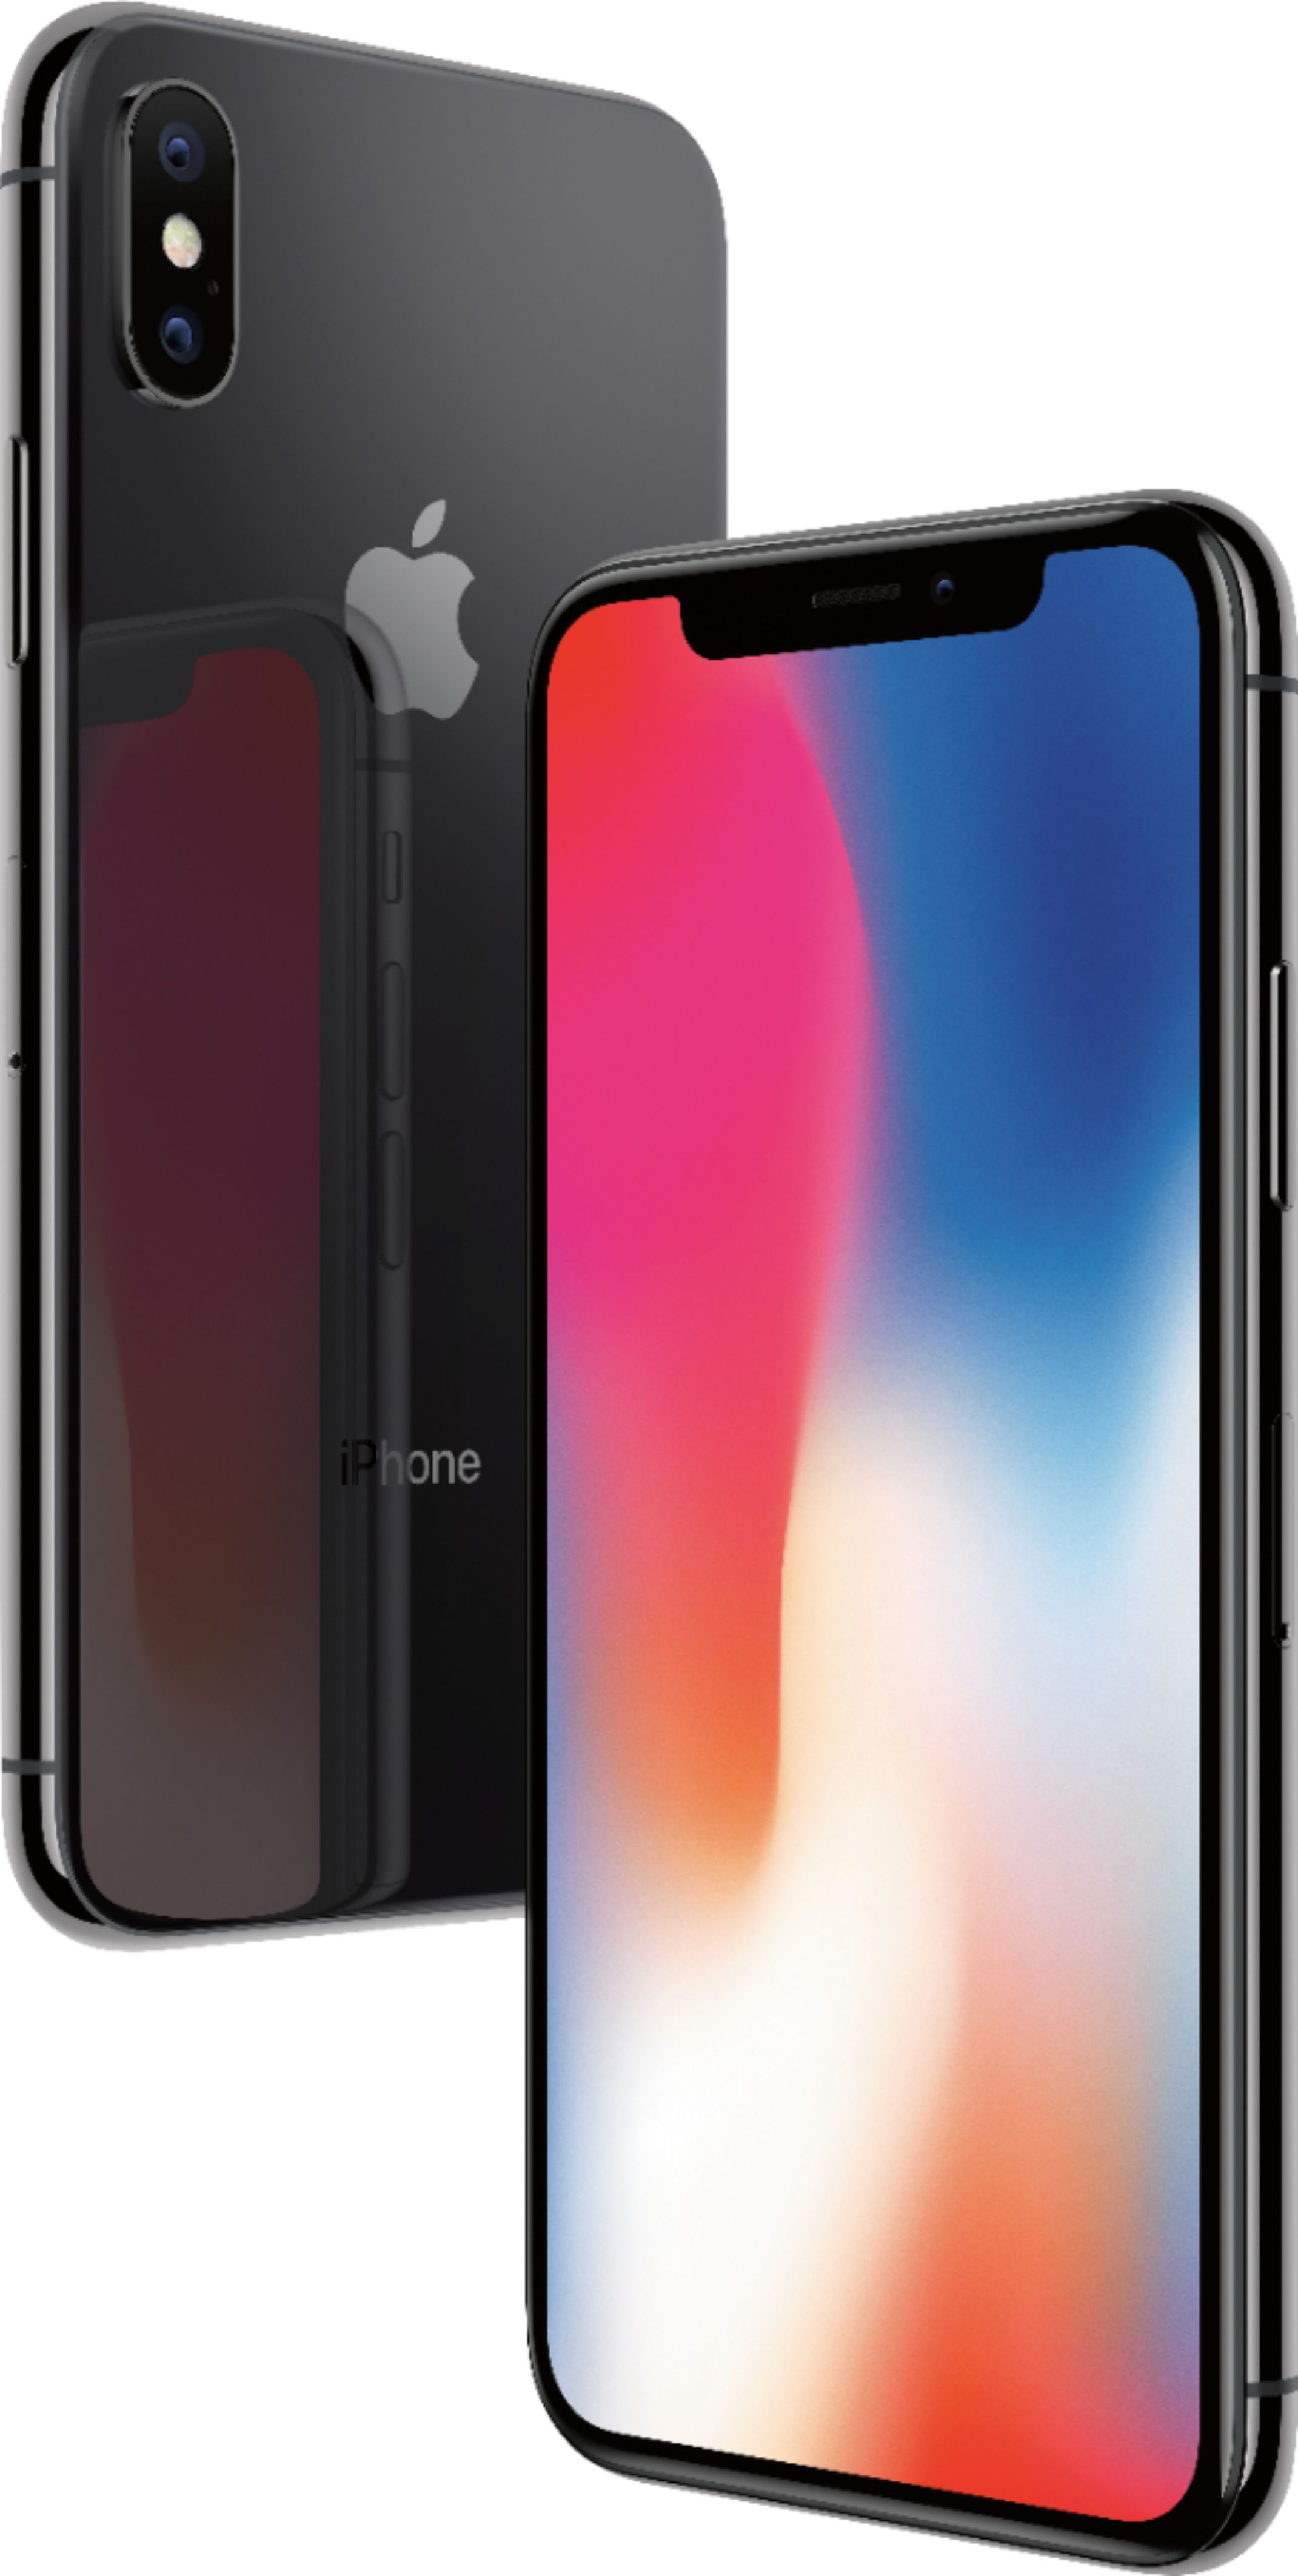 Apple Preowned iPhone X 64GB (Unlocked) Space Gray X 64GB GRAY RB 